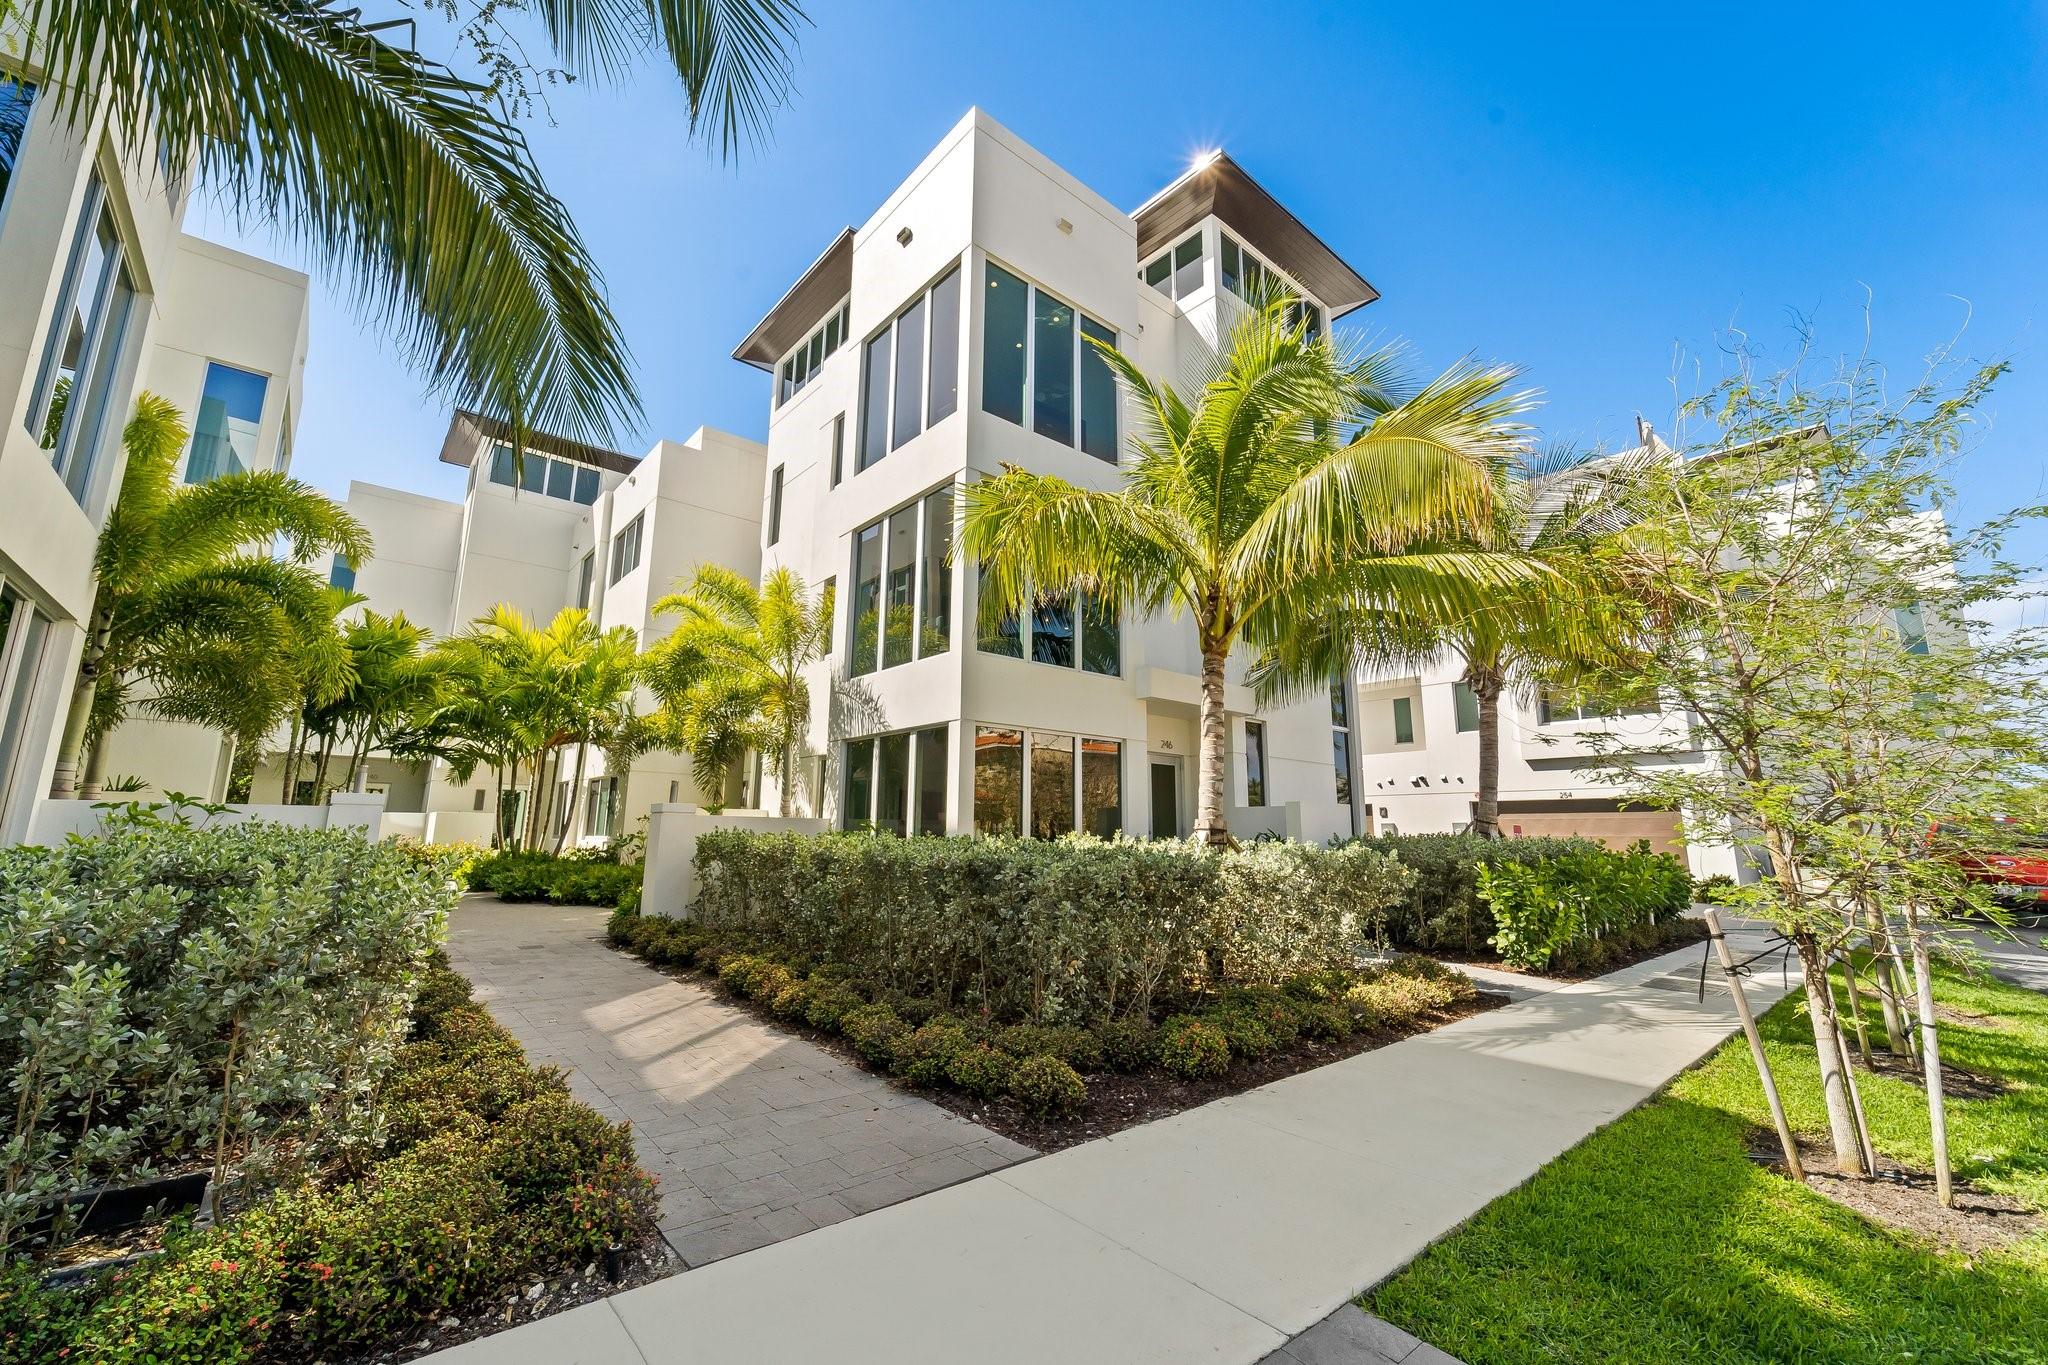 246 Garden Ct #246, Lauderdale By The Sea FL 33308